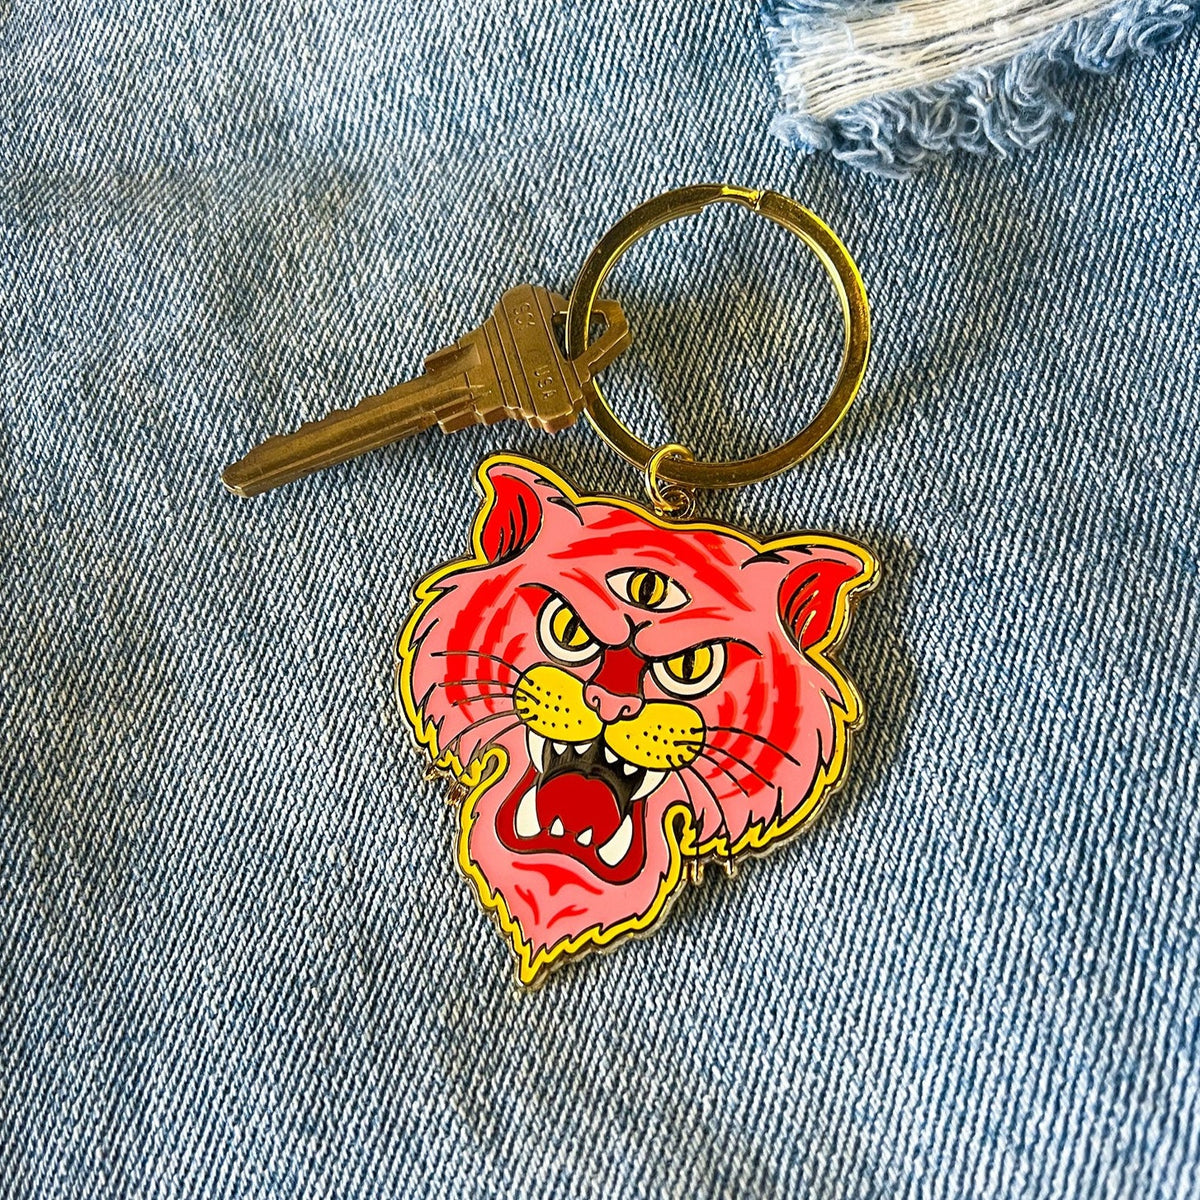 Tough Tiger Gold Plated Hard Enamel Keychain